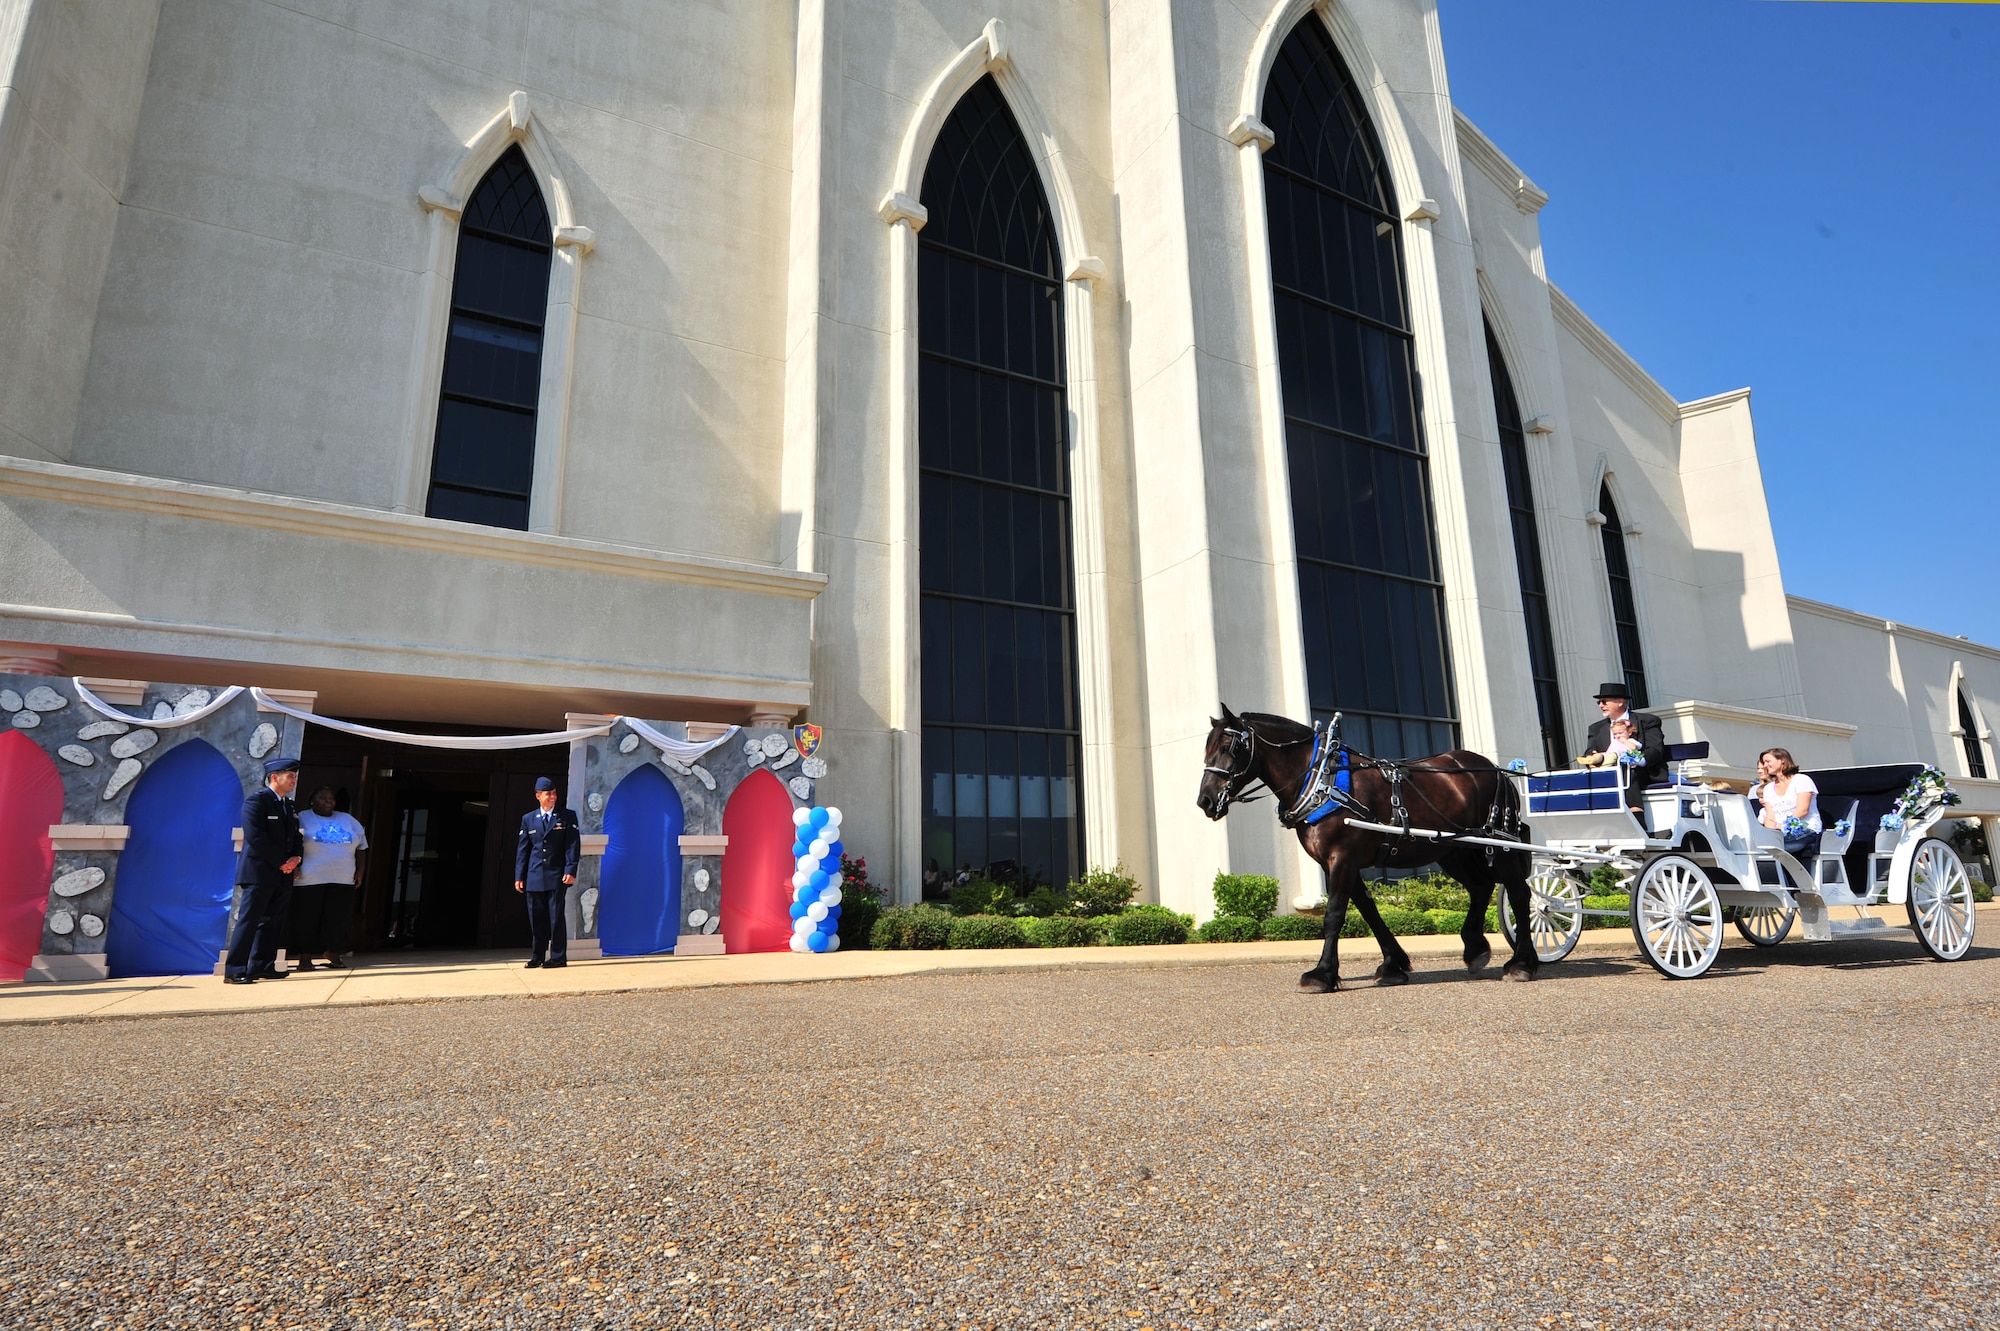 Capt. Michael Davault, left, and Airman 1st Class Chris Elszasz, military volunteers from Maxwell Air Force Base, Fla., prepare to help pageant participants off a carriage ride July 26, 2014, at the Alabama Angels Pageant. Davault, Elszasz and approximately two dozen other Maxwell service members volunteered for the special needs pageant. (U.S. Air Force photo/Staff Sgt. Natasha Stannard)